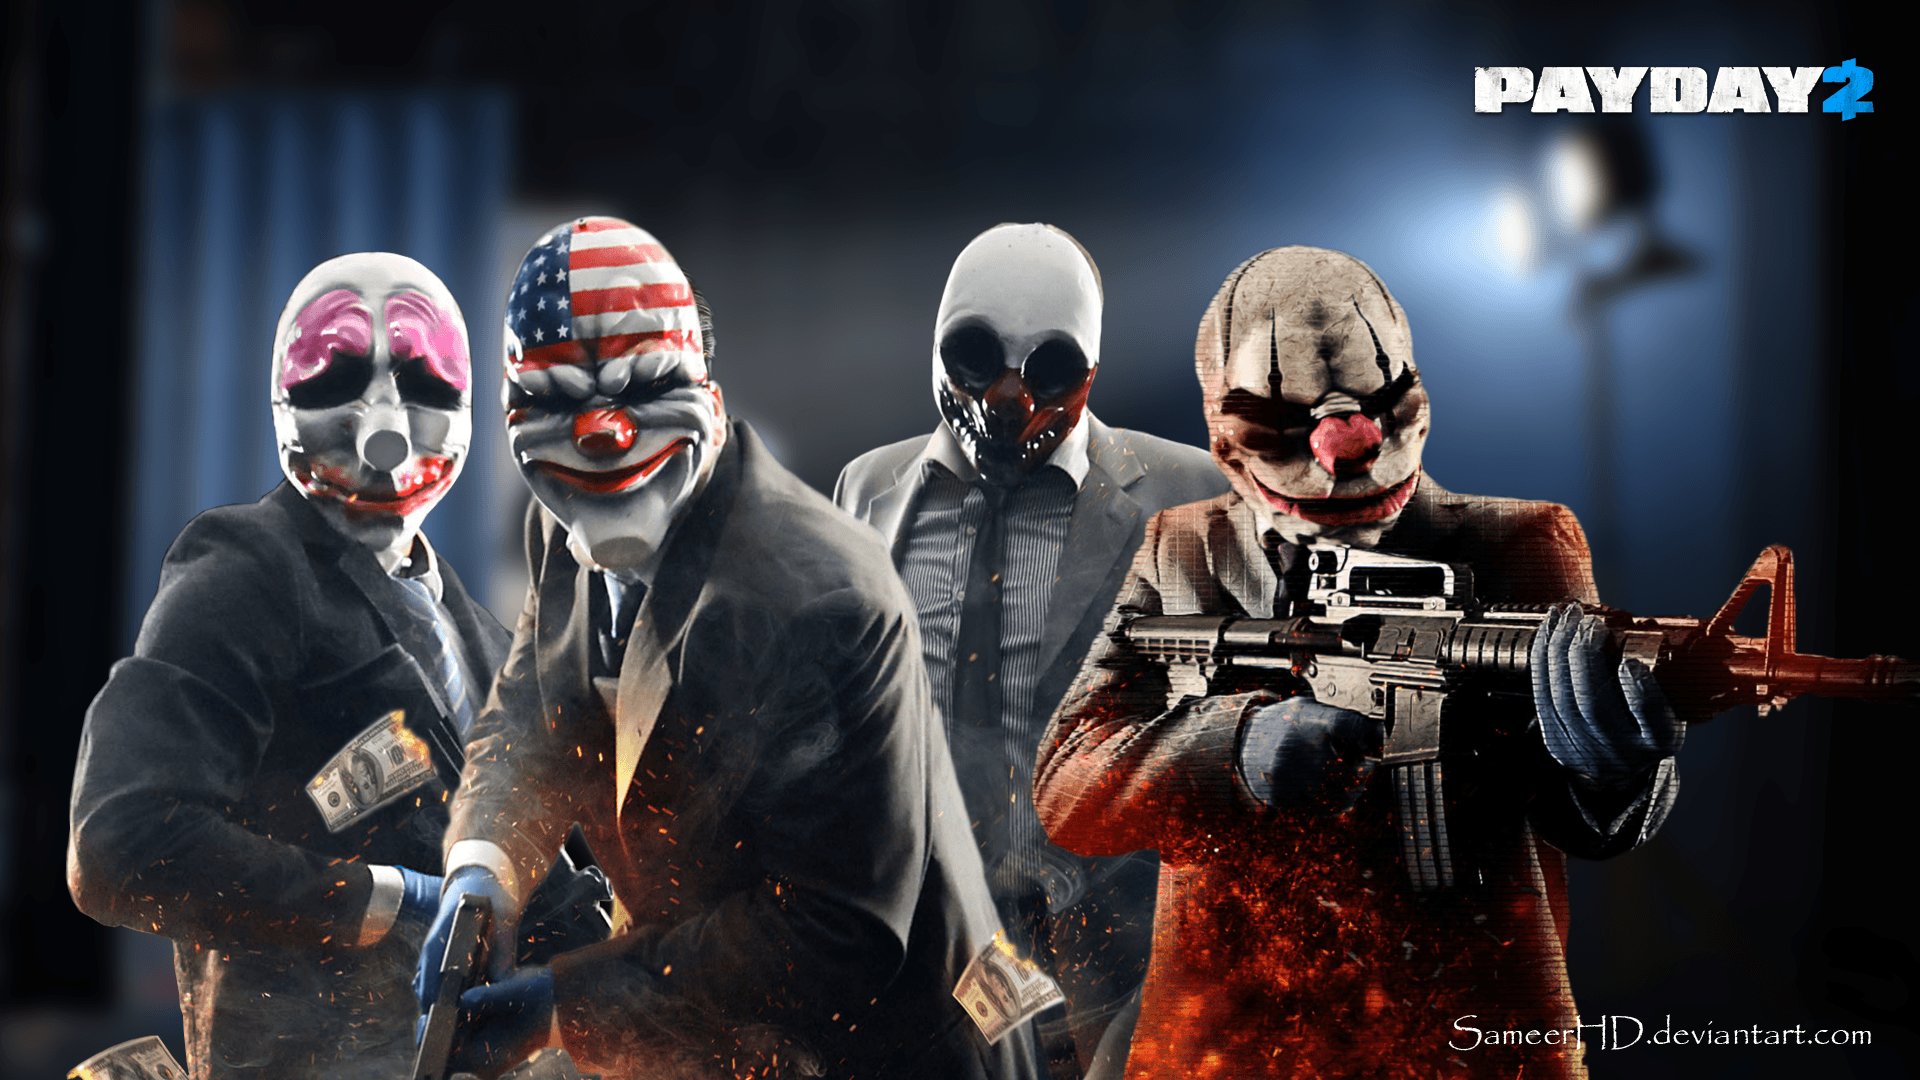 payday 2 free download pc full